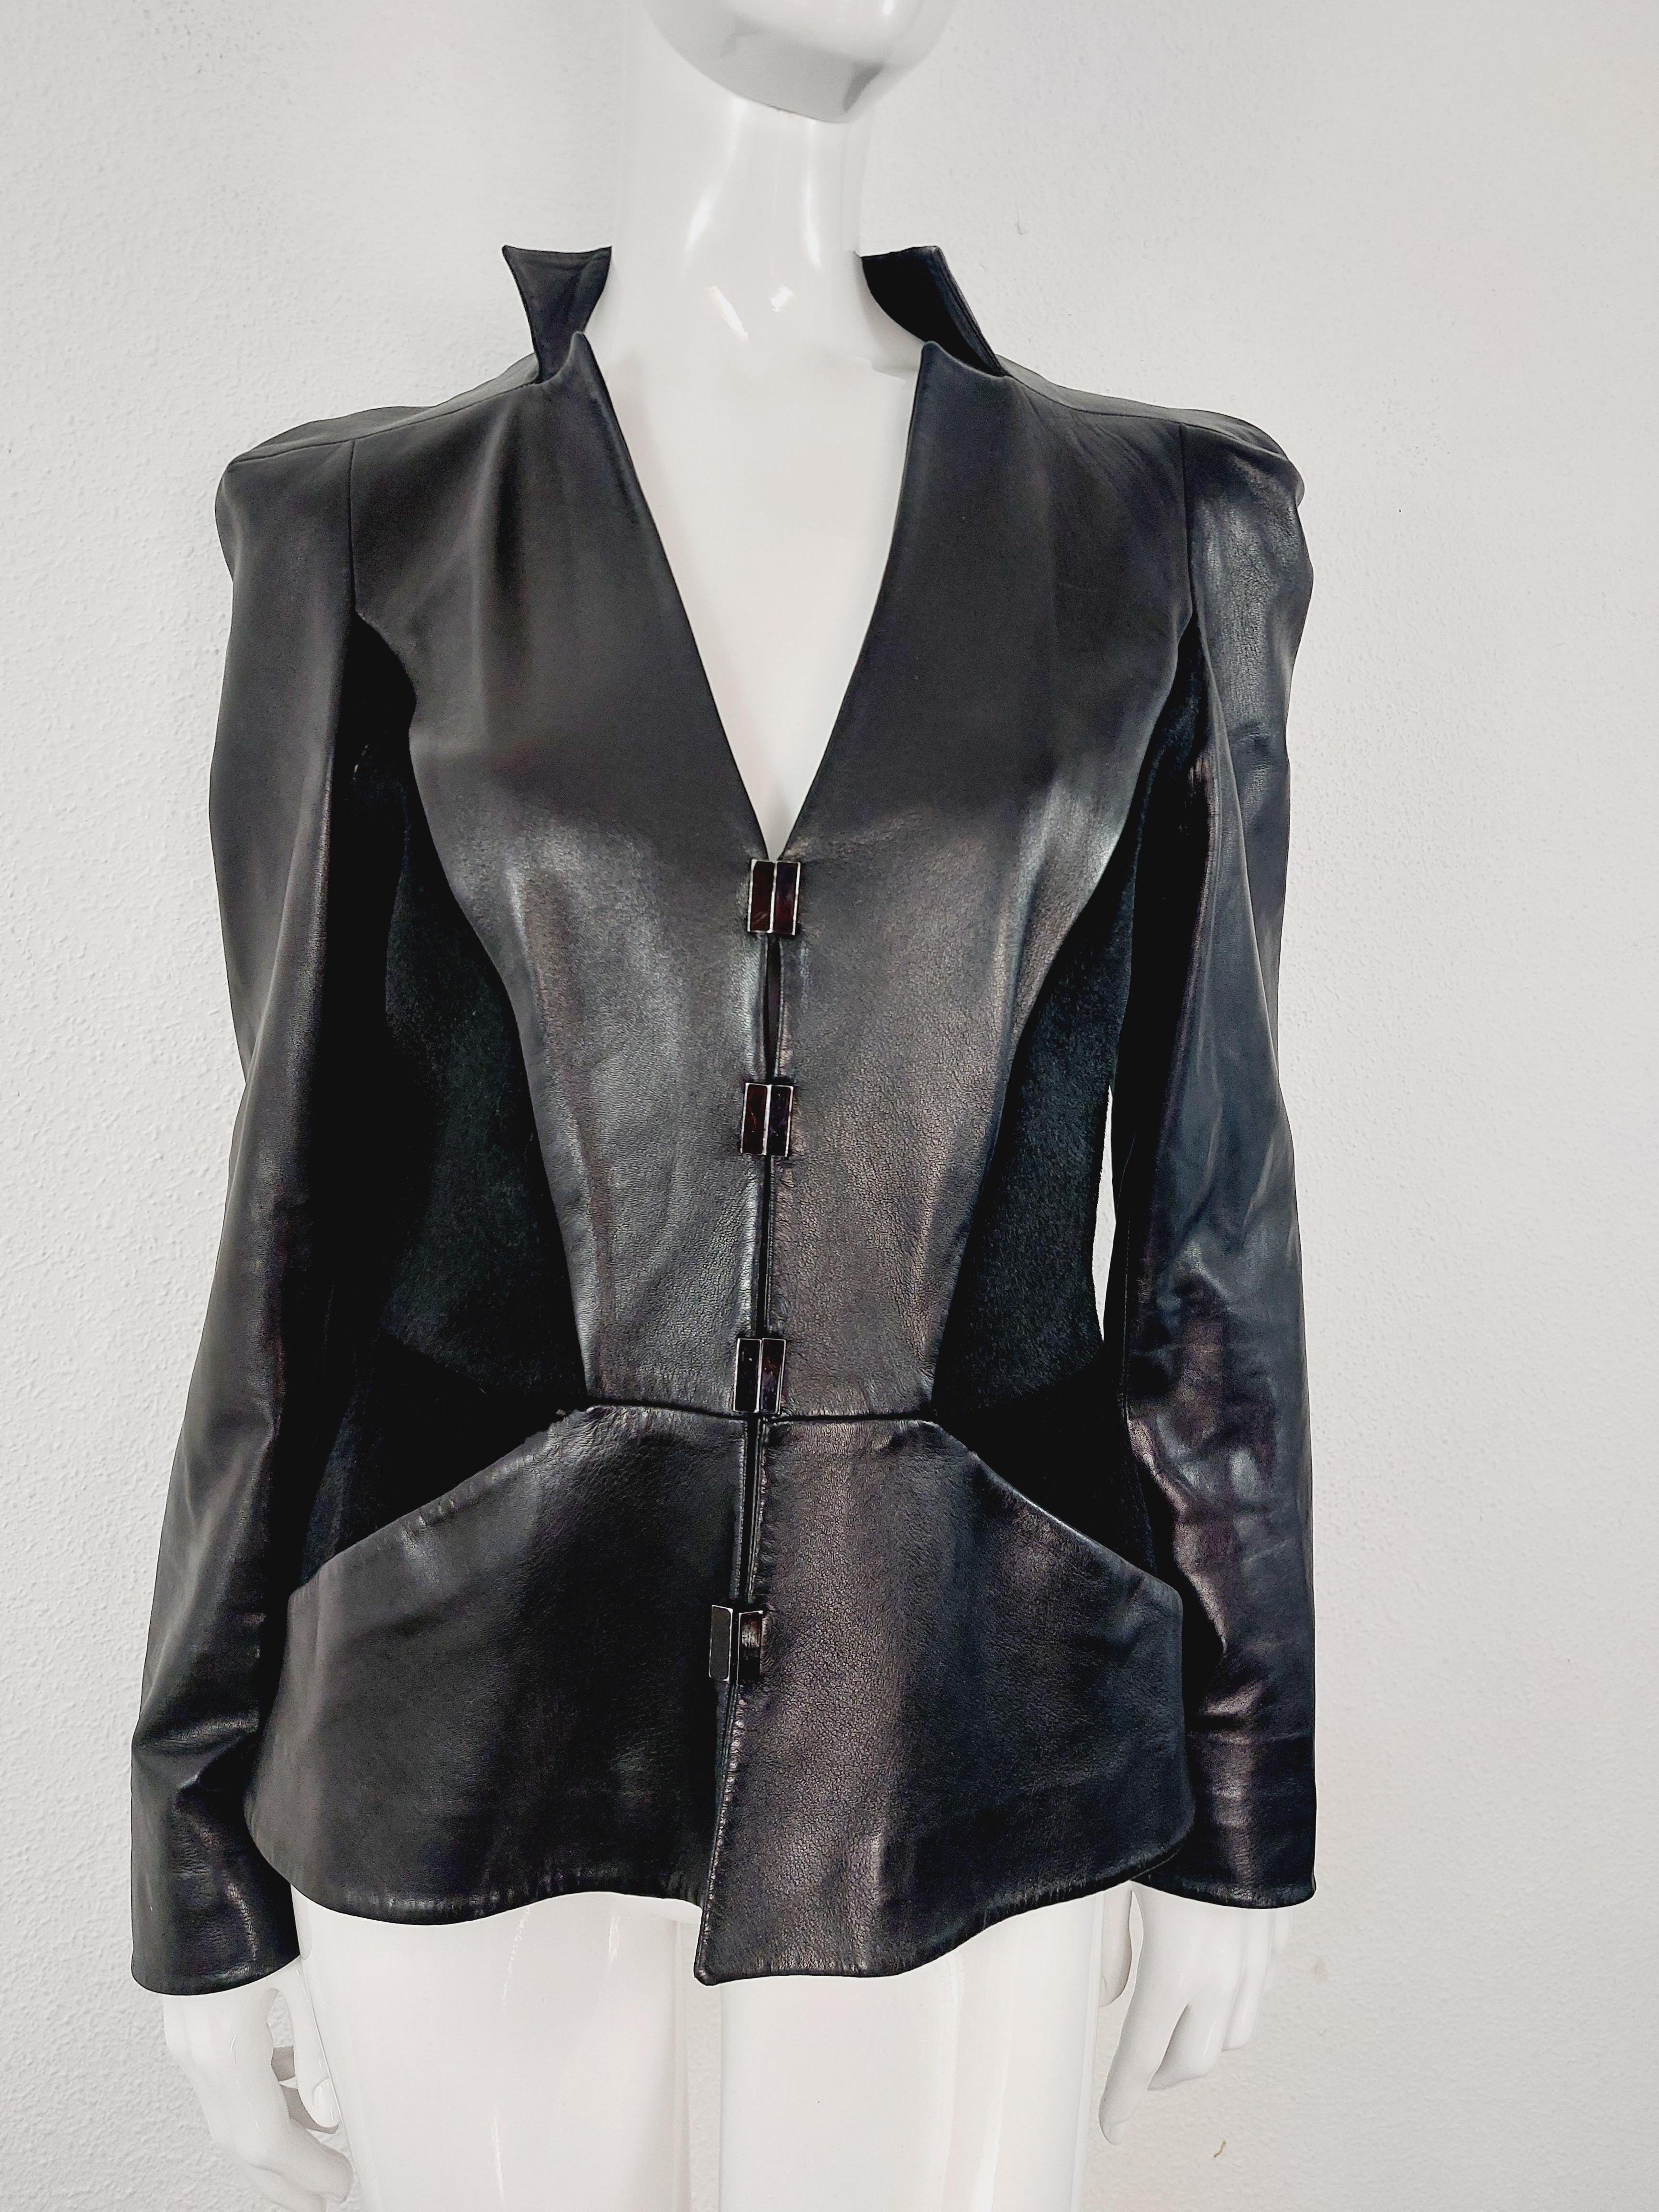 Thierry Mugler Couture Leather Lambskin Runway Motorcycle Wasp Waist Jacket For Sale 6